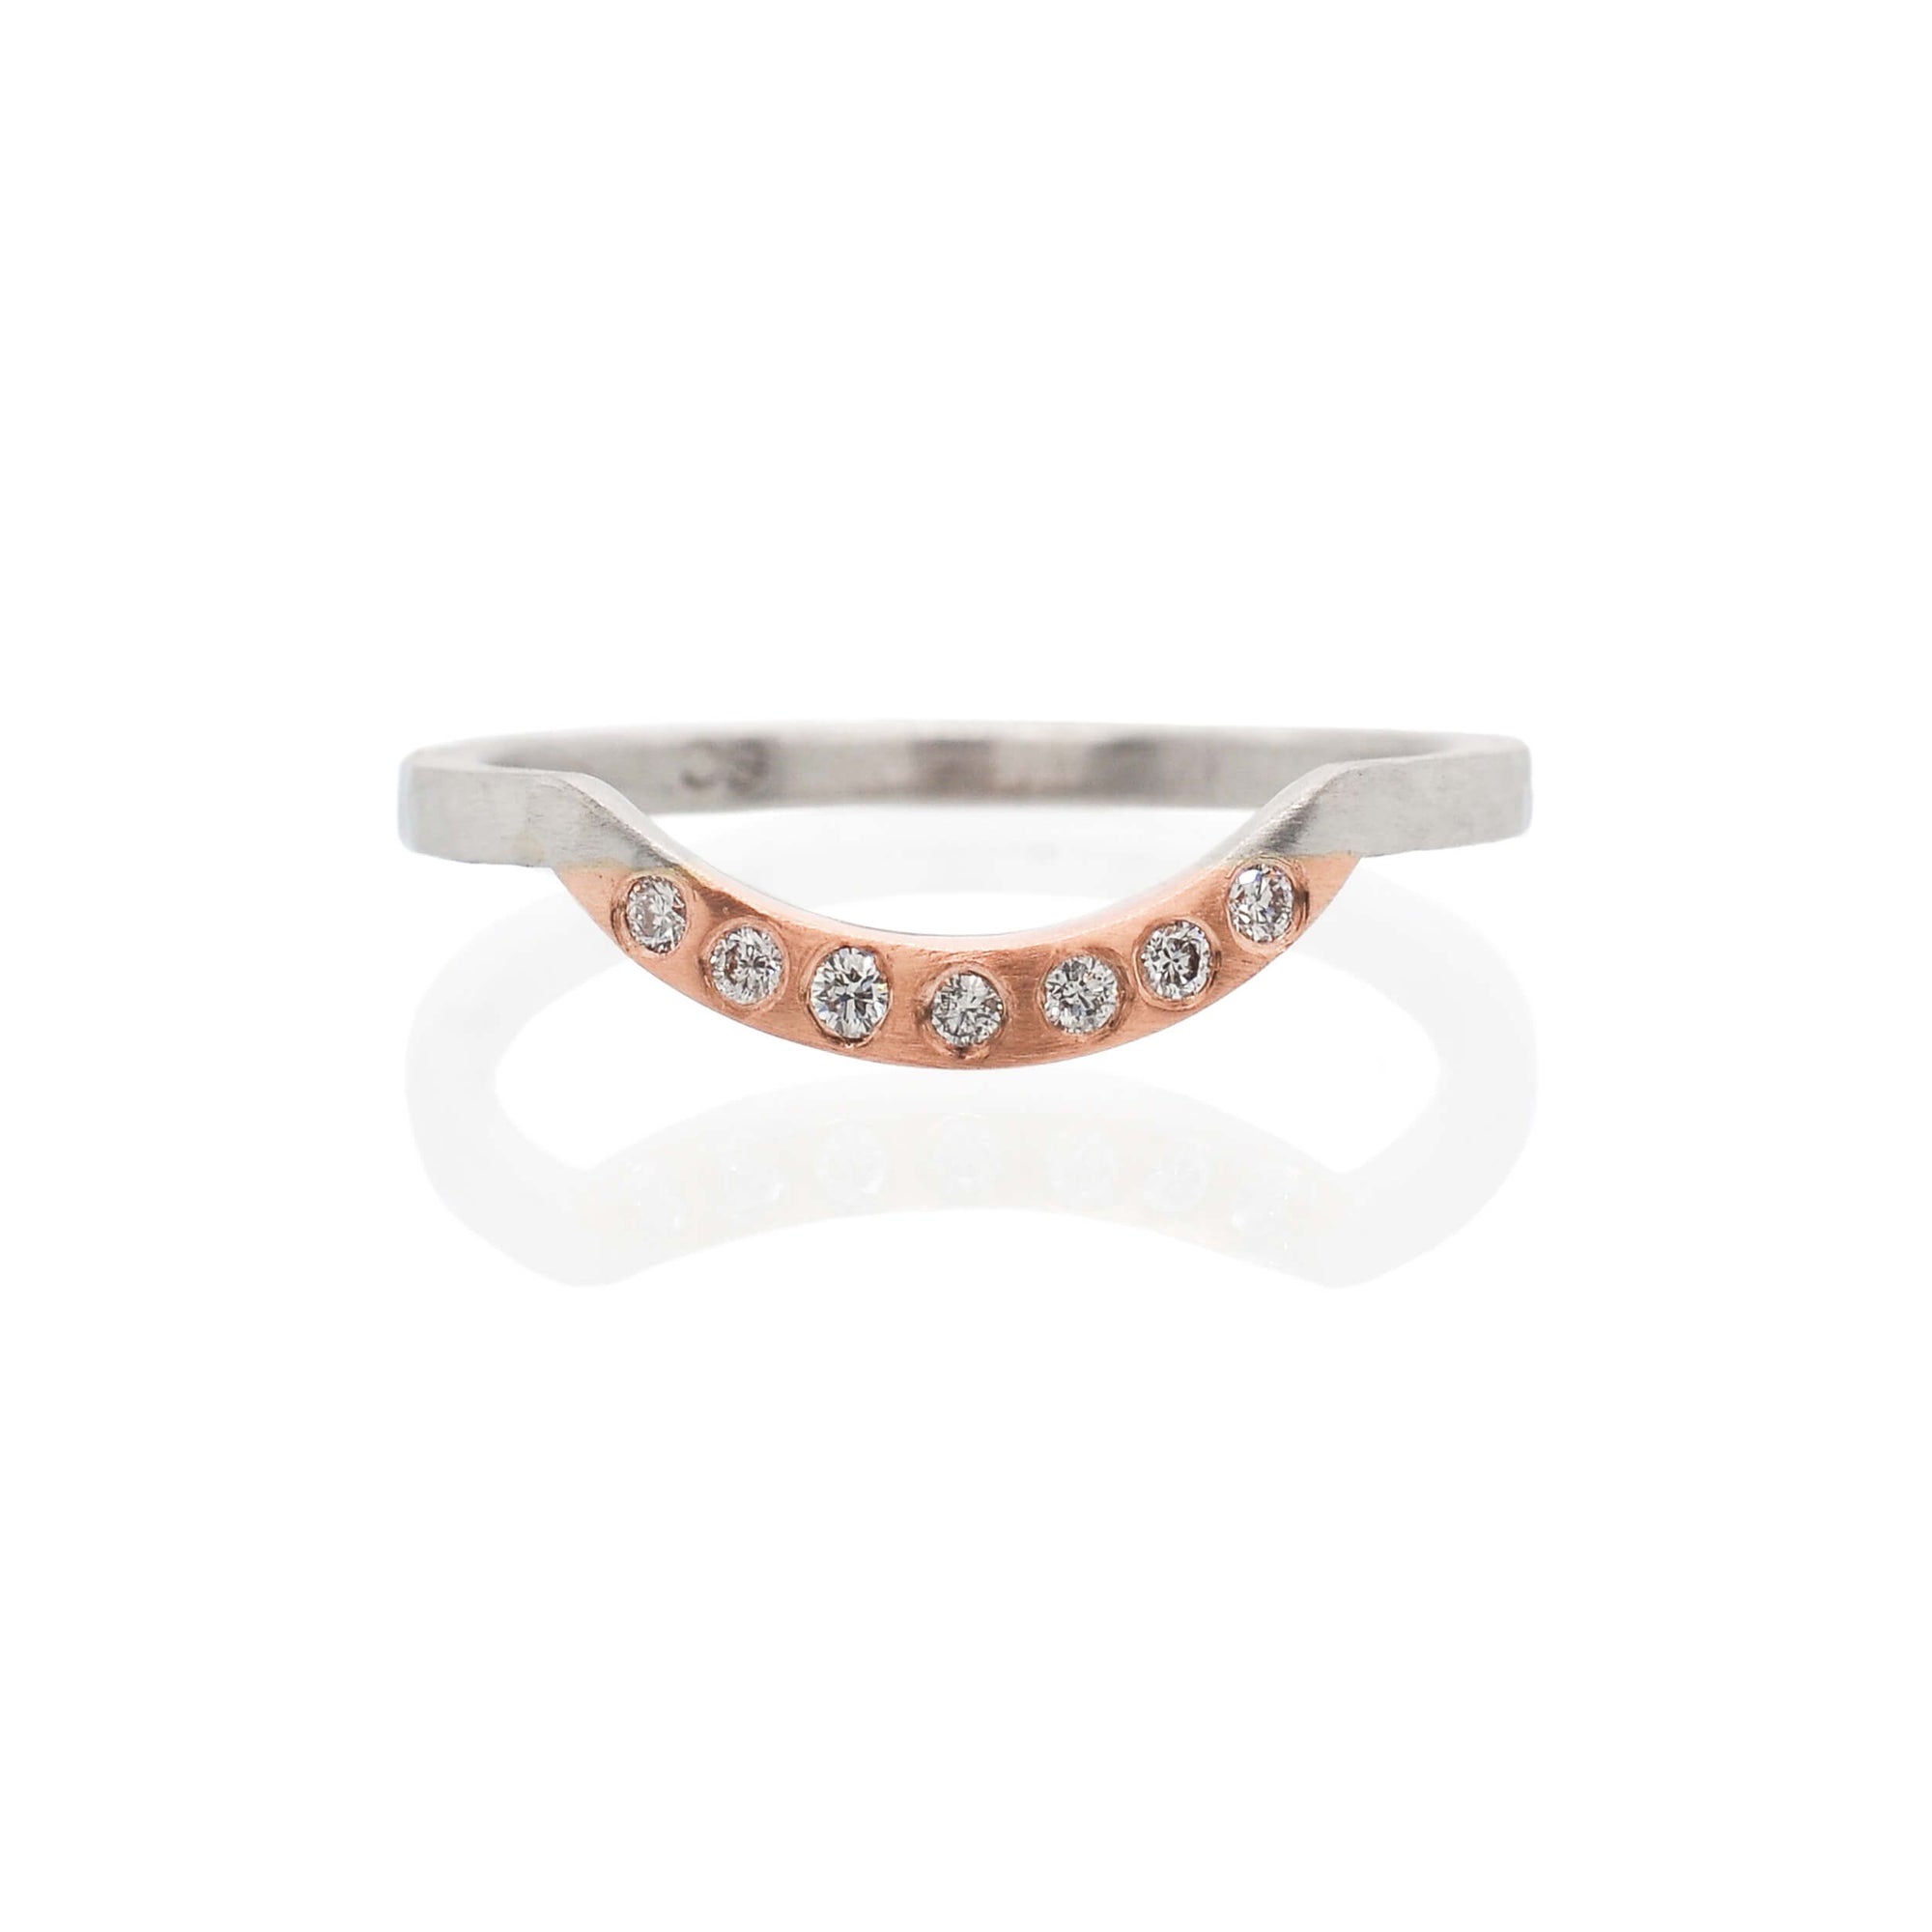 Palladium and rose gold contour ring with flush set diamonds. Handmade by EC Design Jewelry in Minneapolis, MN using recycled metal and conflict-free stones.